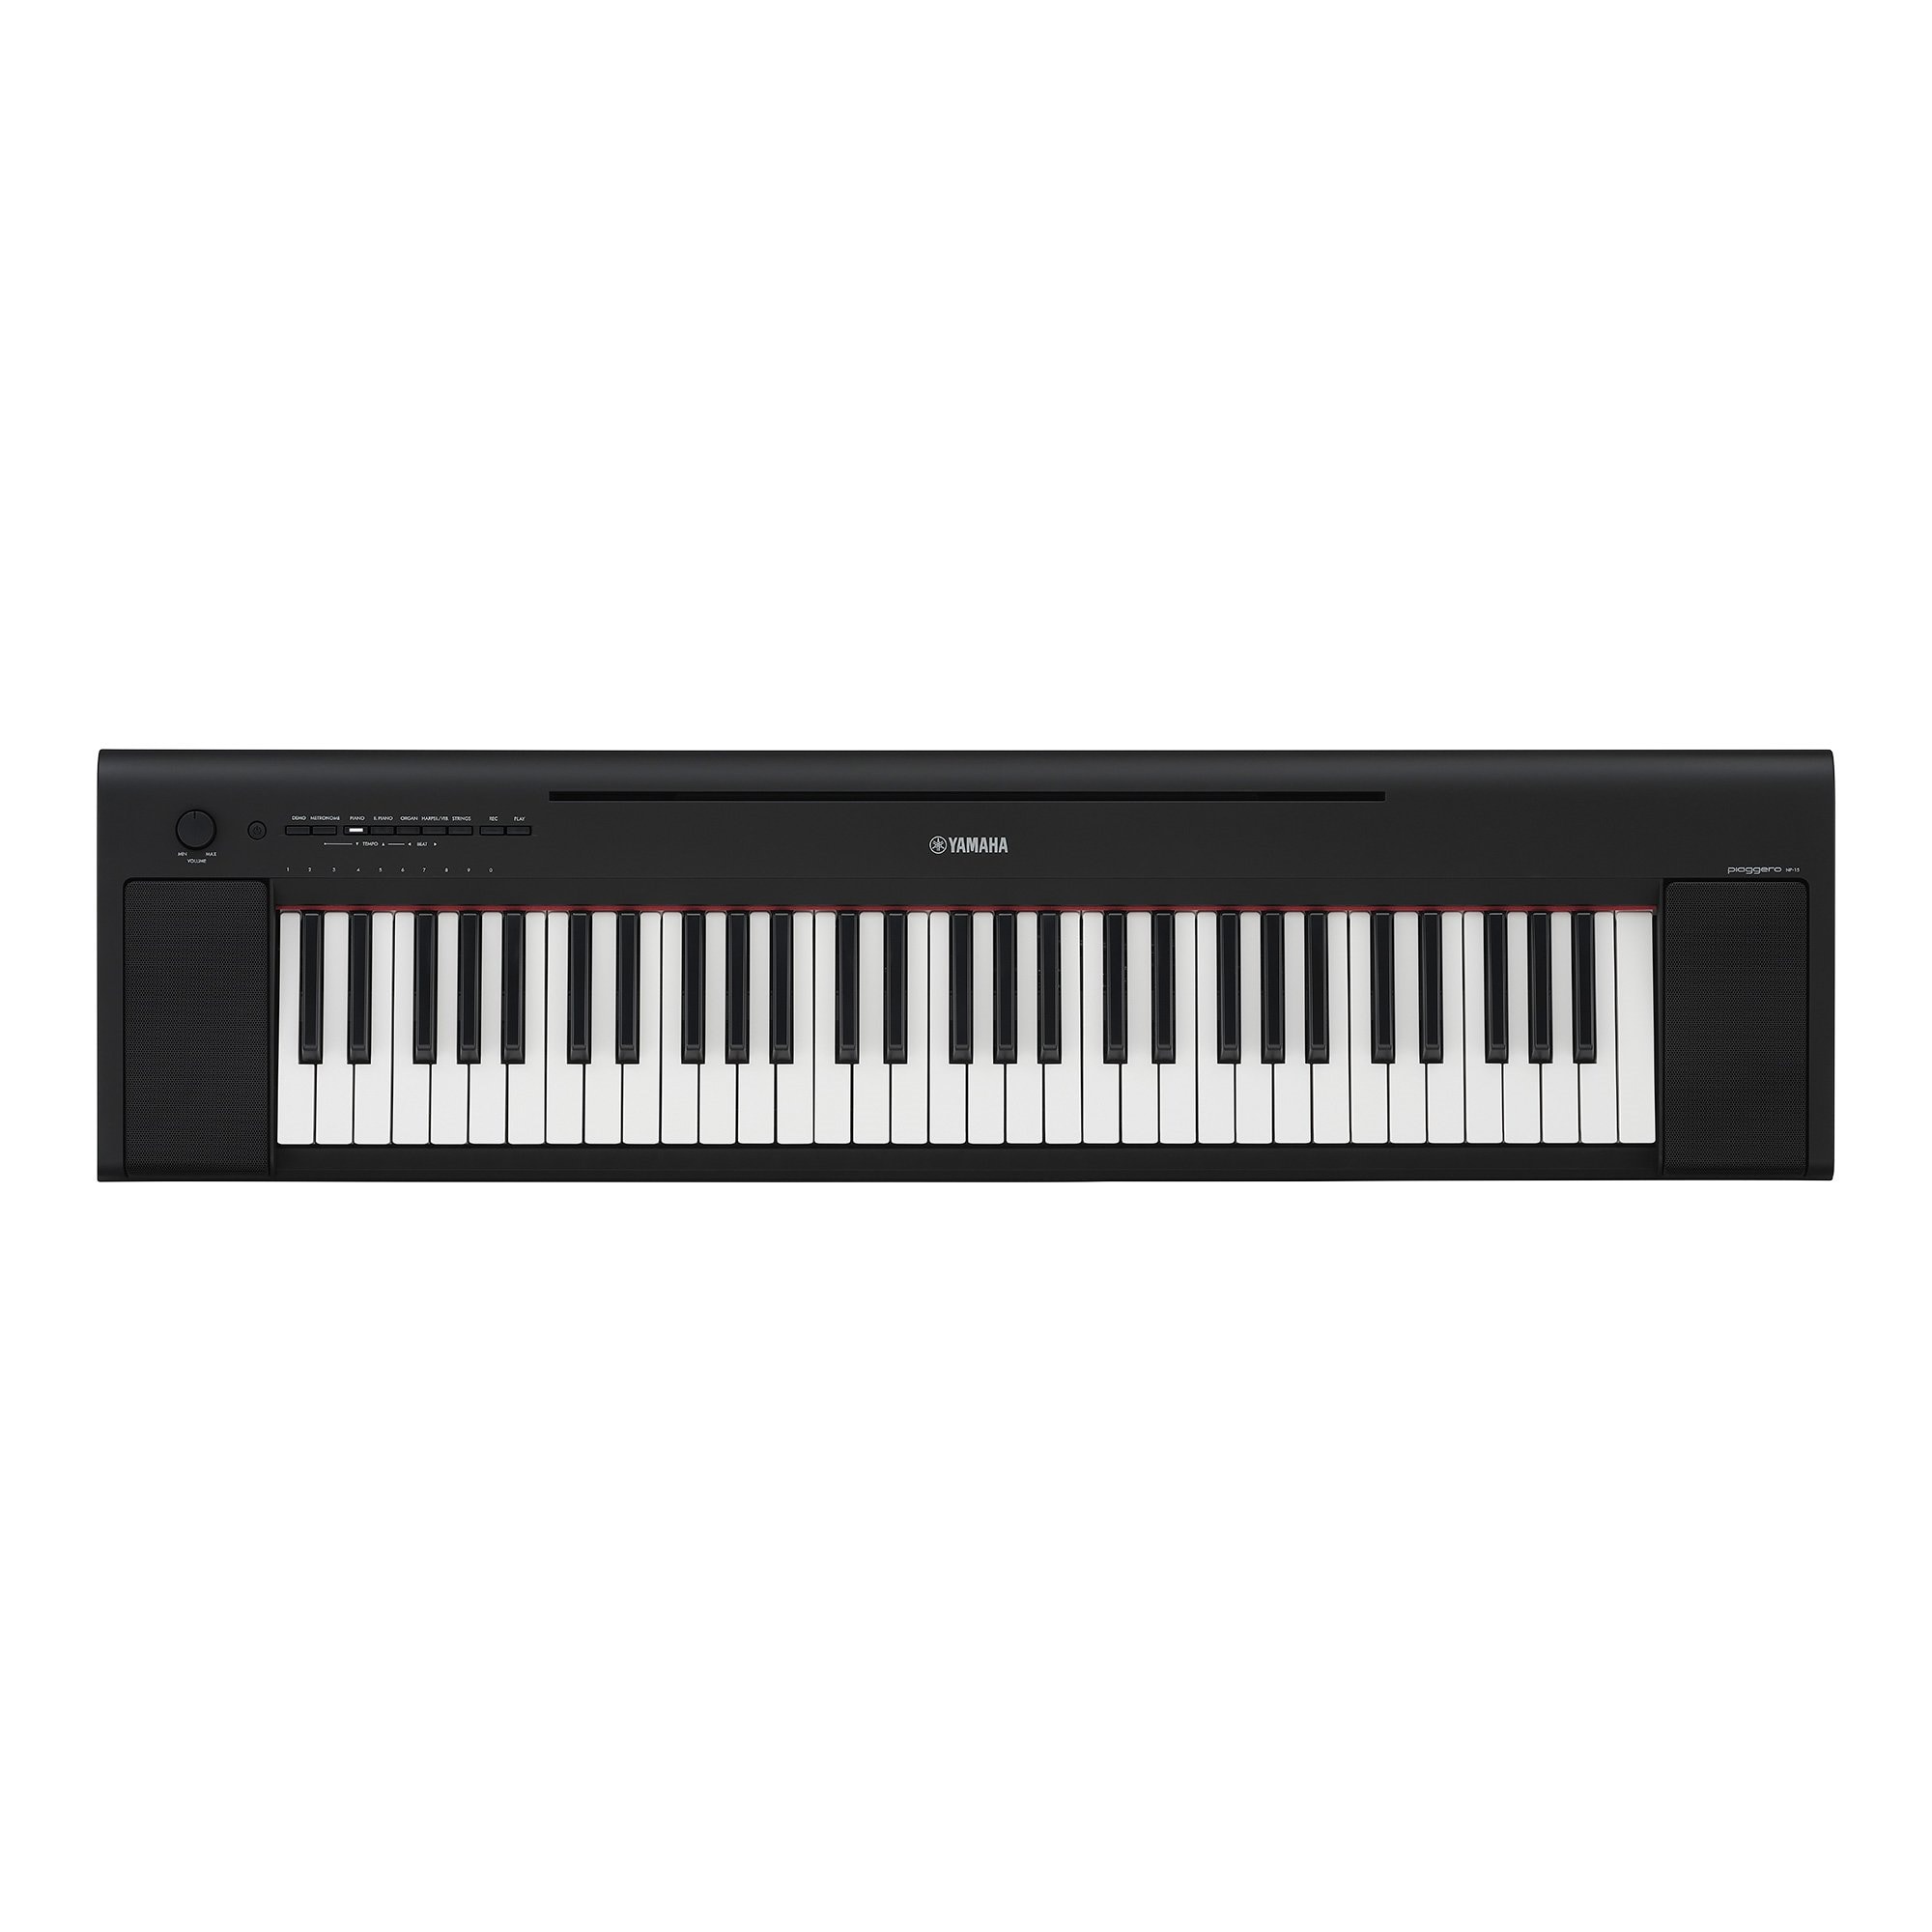 Piaggero - Keyboard Instruments - Musical Instruments - Products